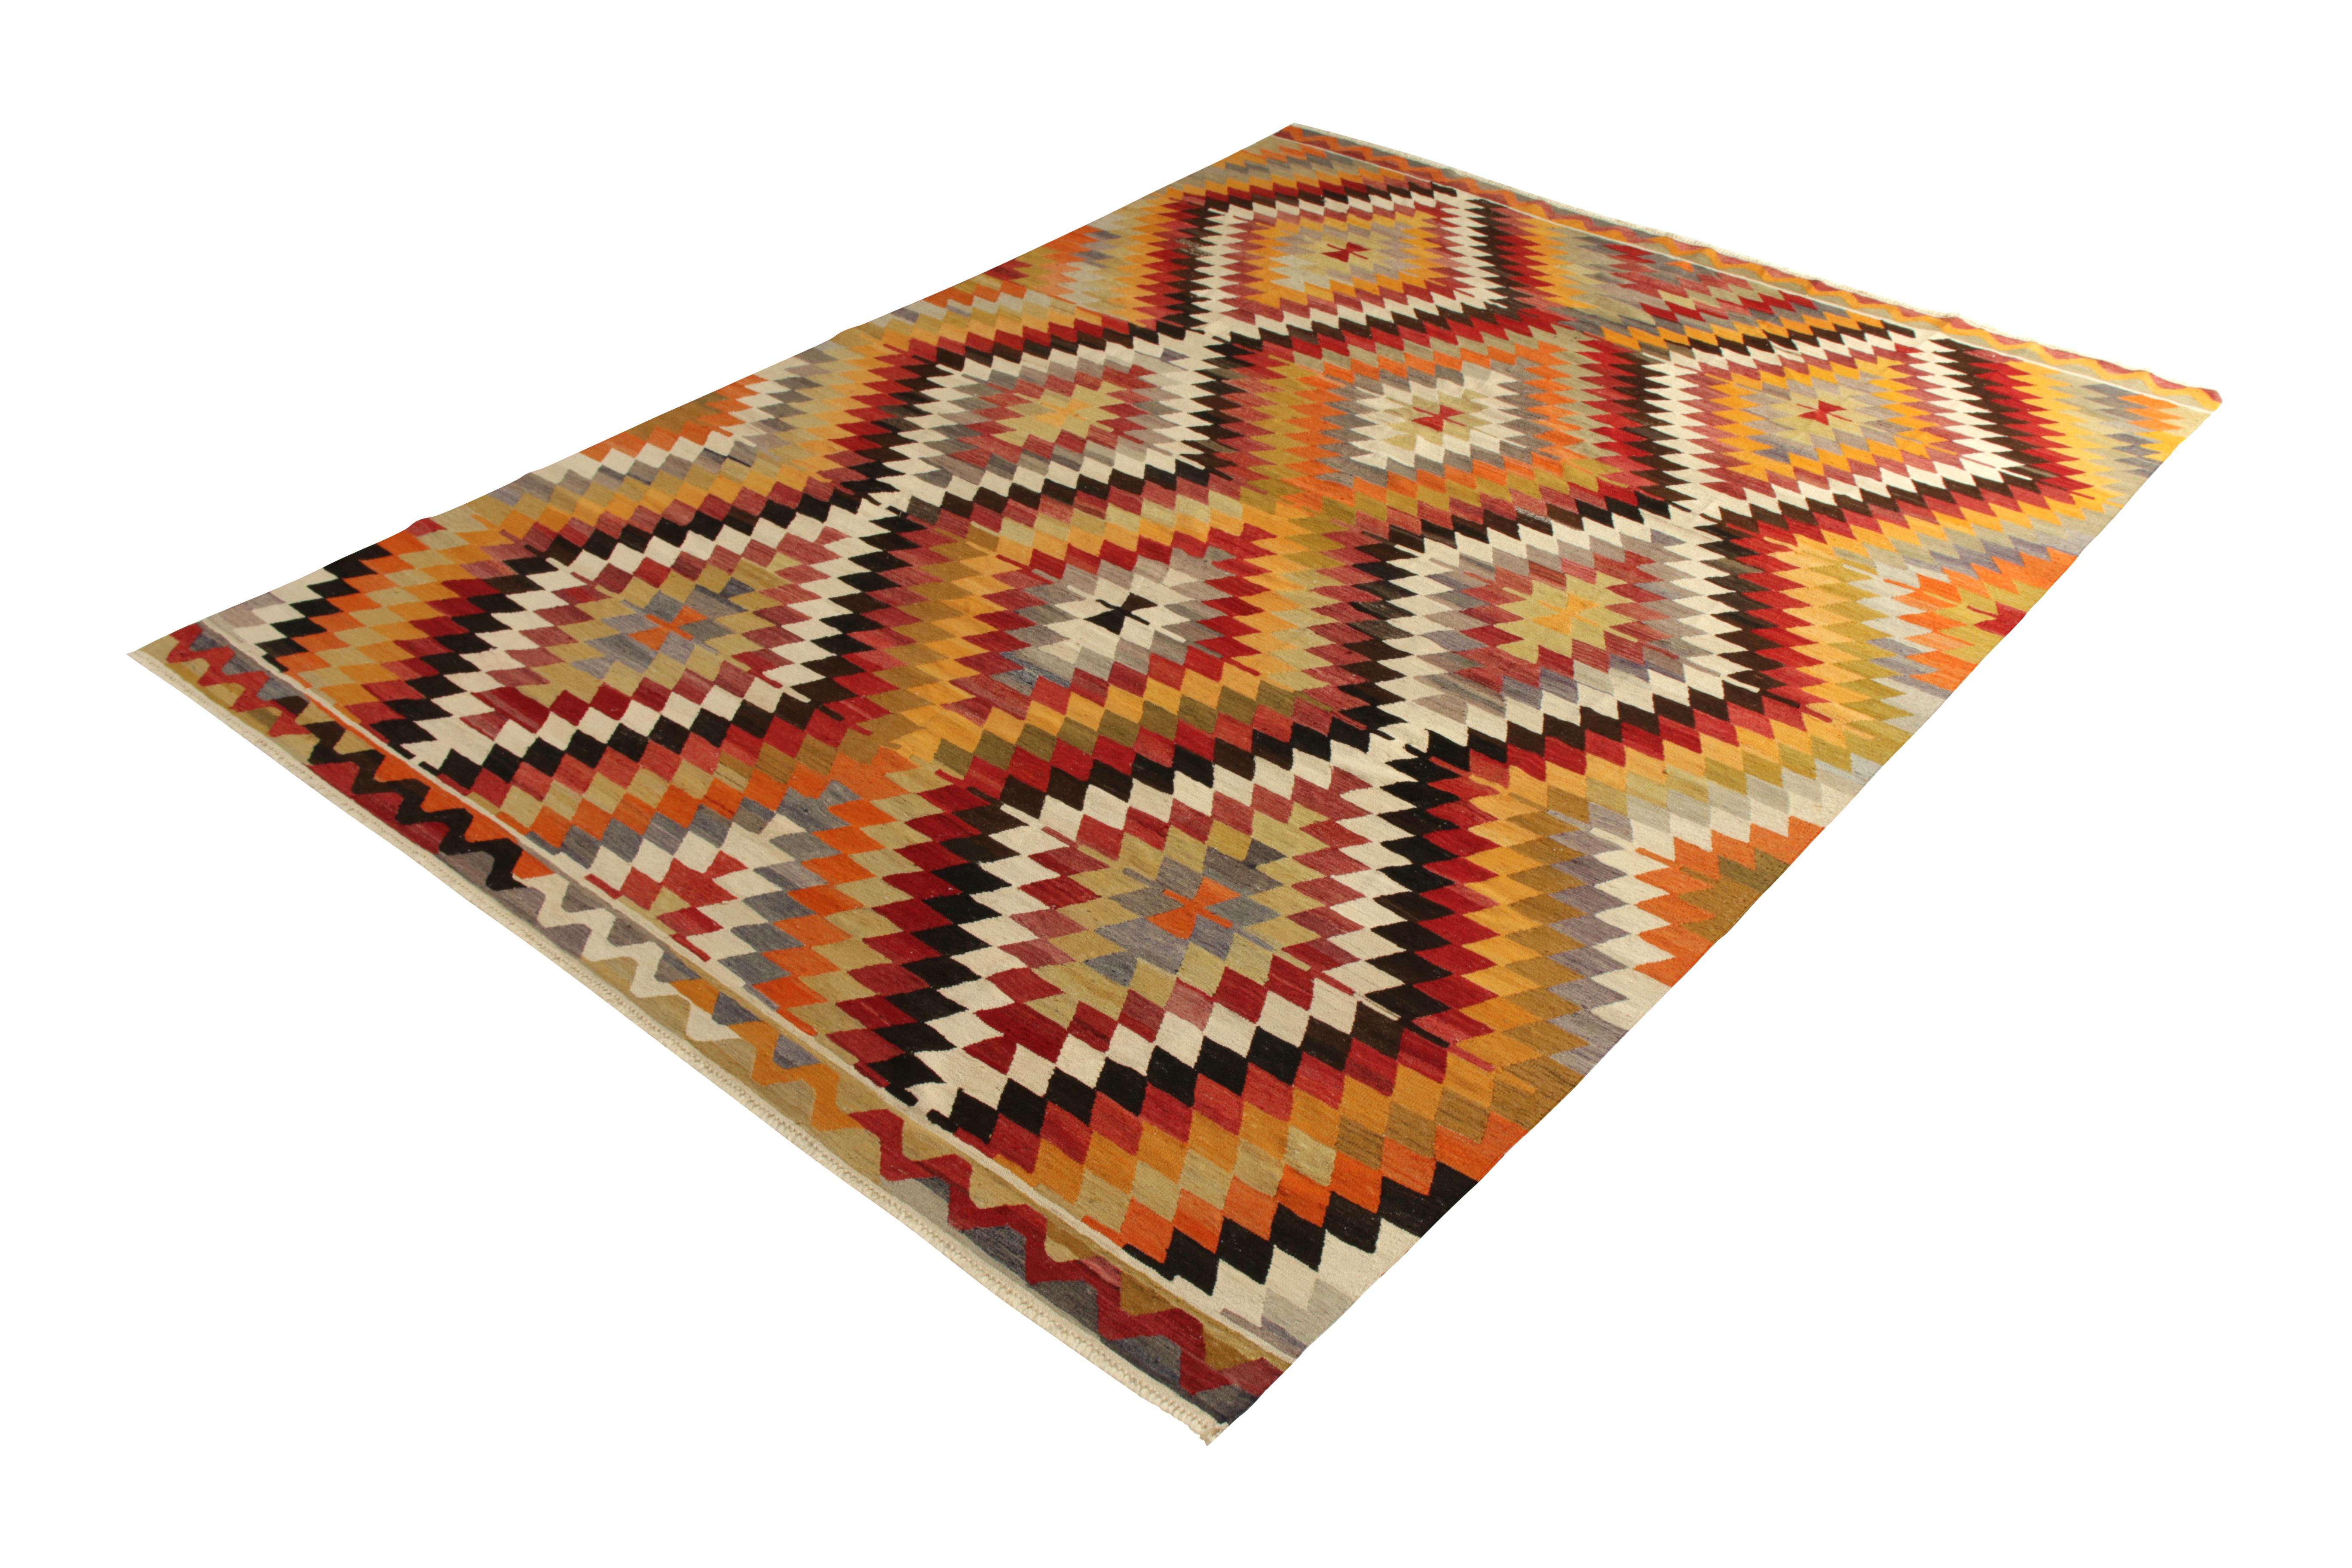 Handwoven in wool originating from Turkey circa 1950-1960, this item is a vintage Kilim rug connoting a midcentury Turkish diamond pattern emerging in this period, known for producing Kilim rugs with modern and maximalist appeal in the geometry and